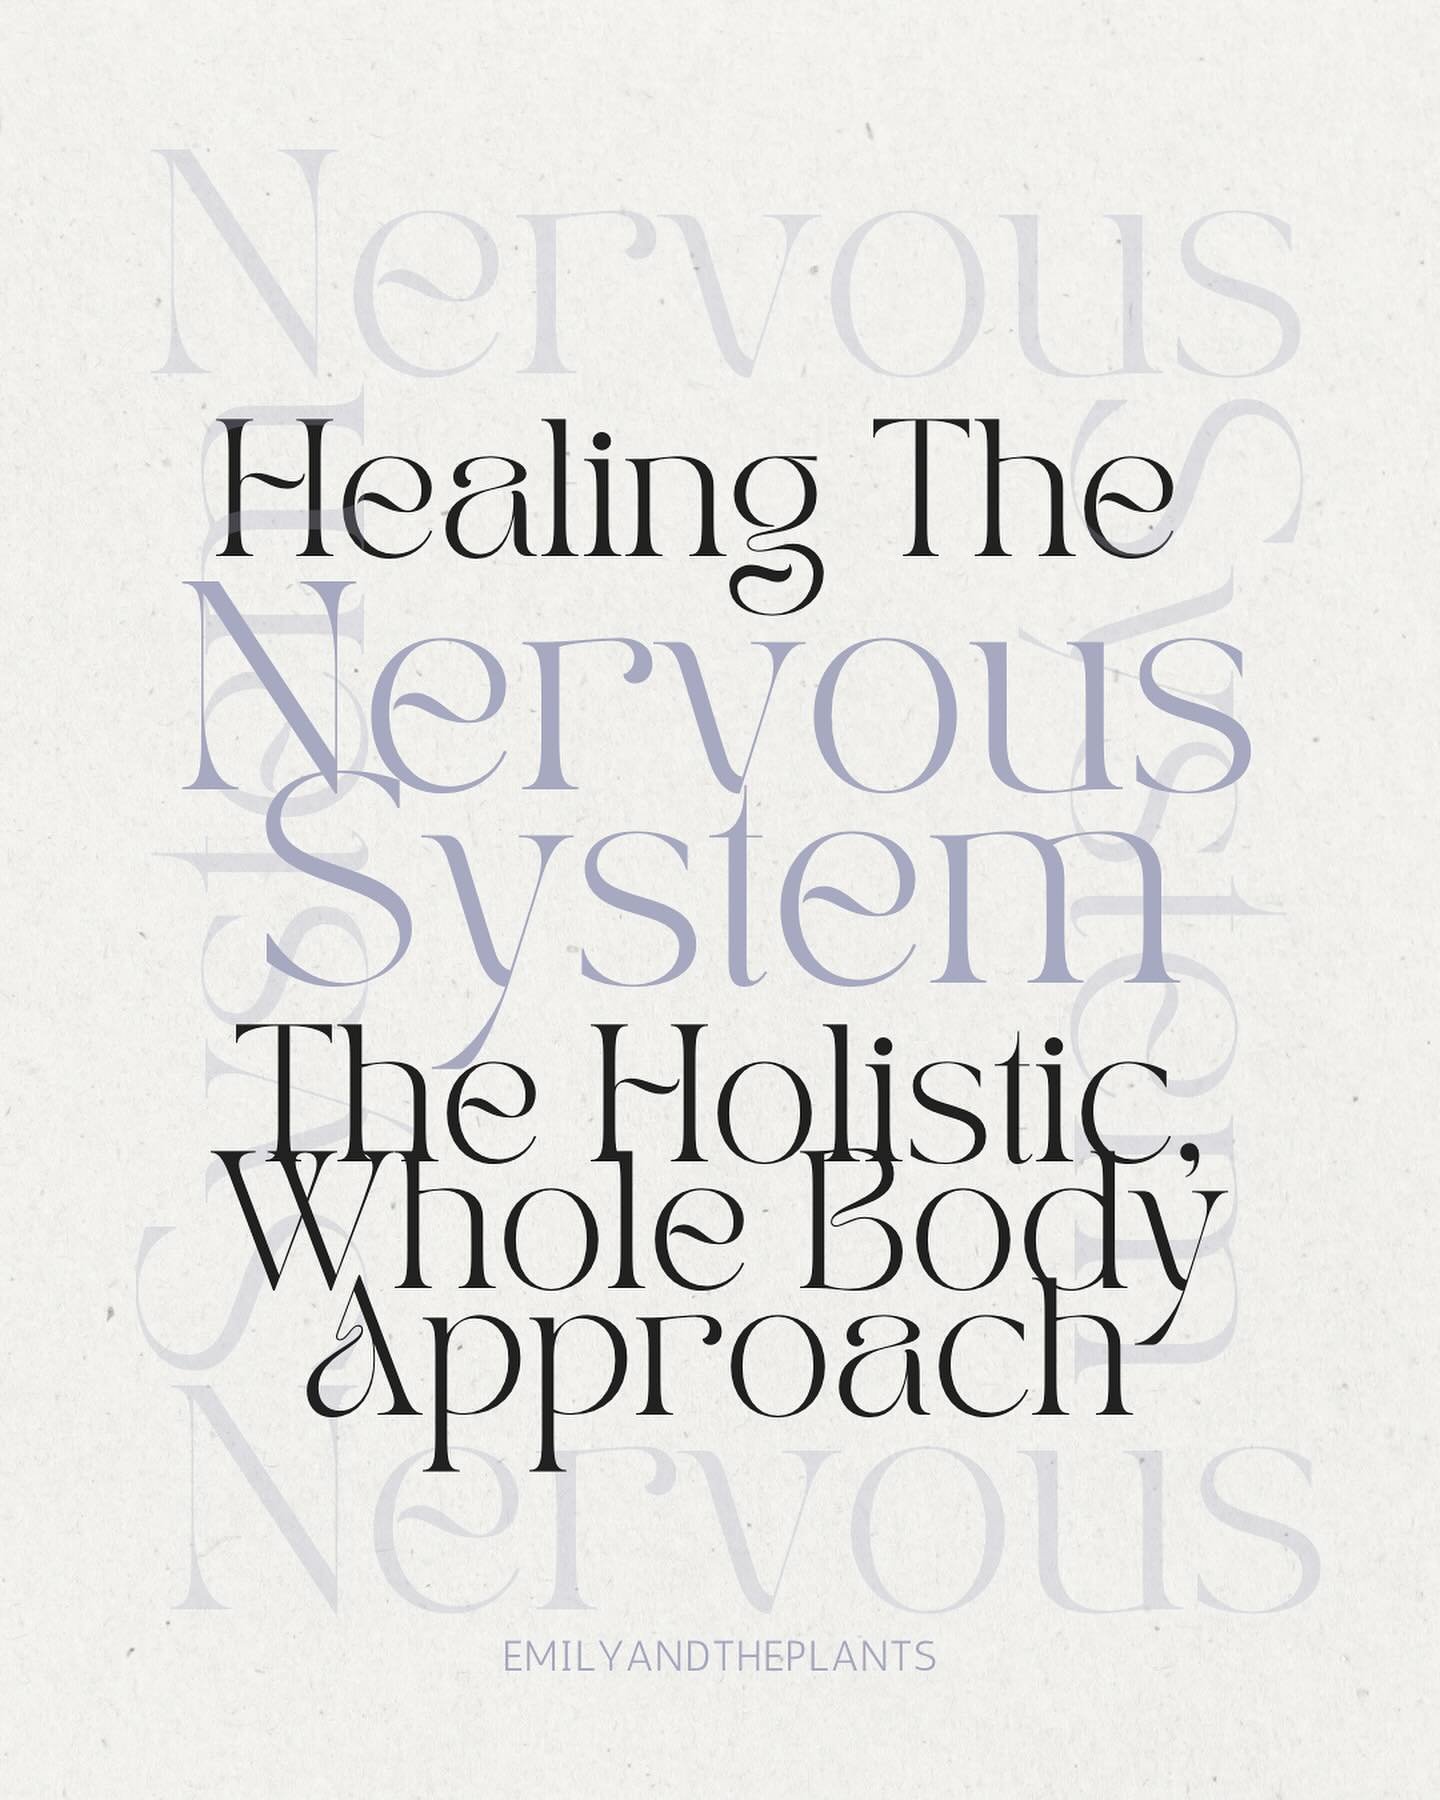 A whole body holistic view of the Nervous system

The nervous system spiderwebs and interacts with the entire body. That means that to heal the whole body we must approach the nervous system in a whole or holistic way.

Everything is interconnected.
